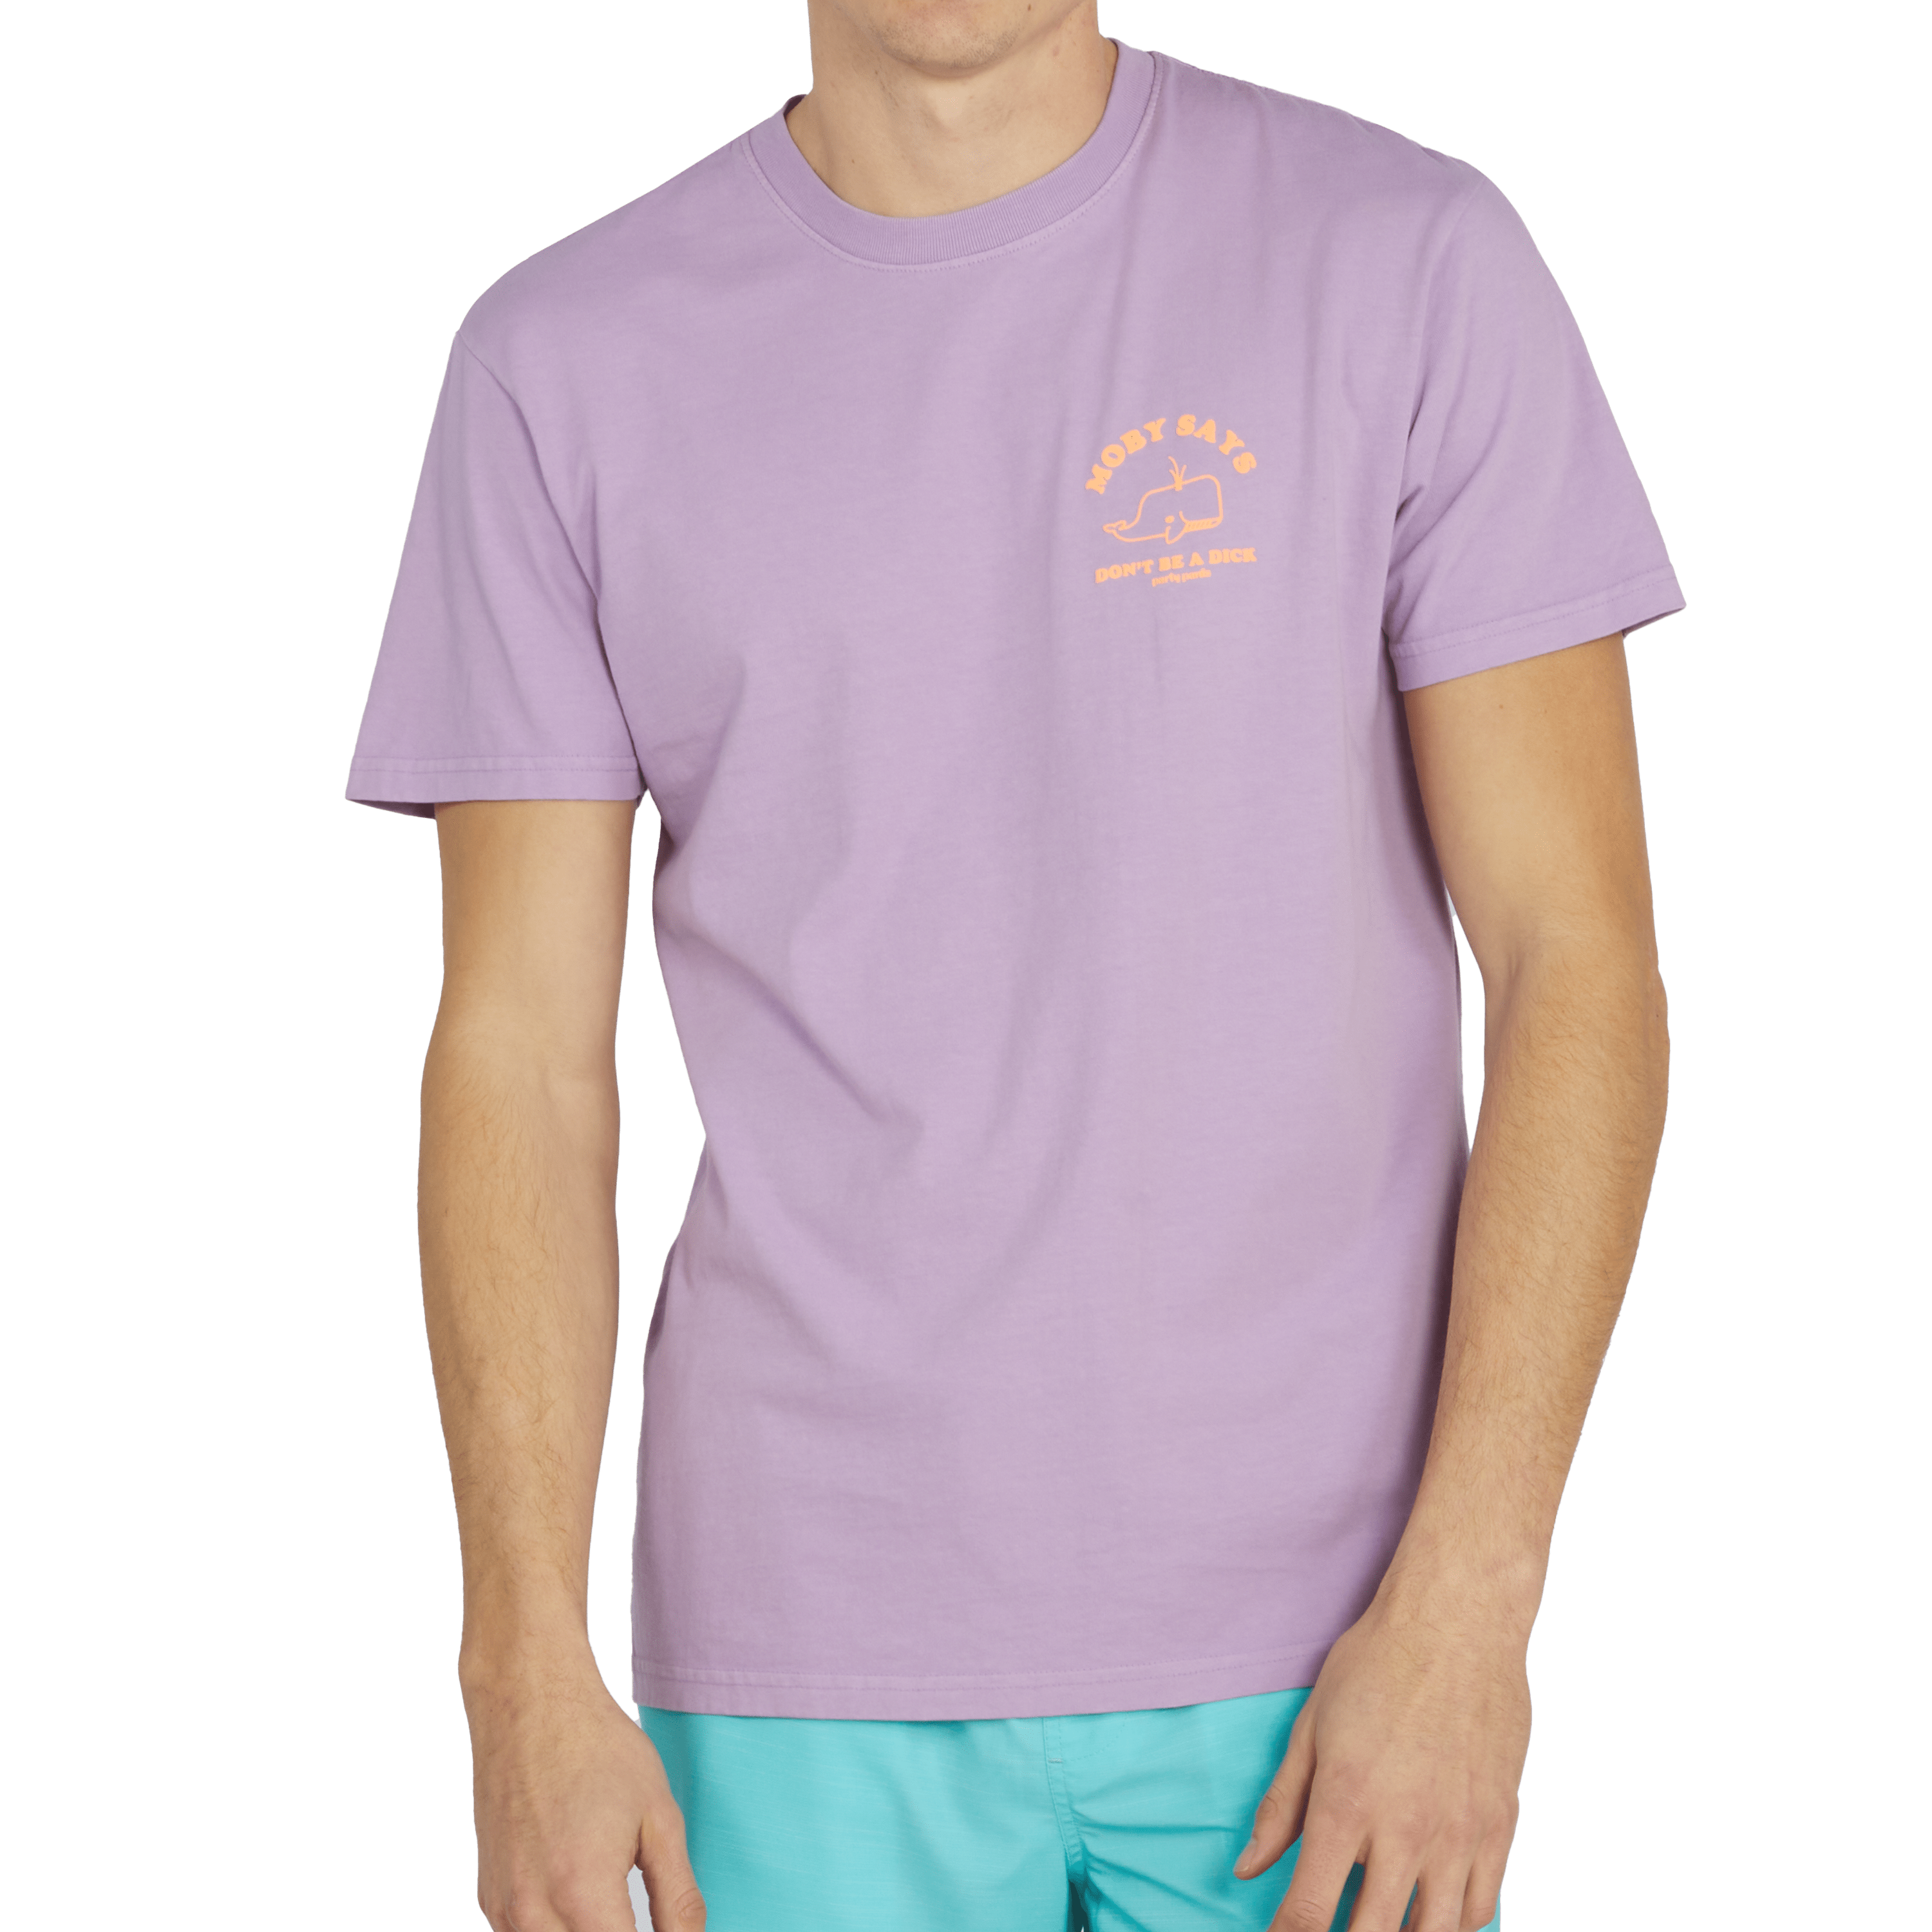 MOBY SAYS T-SHIRT - PURPLE TEE PARTY PANTS 